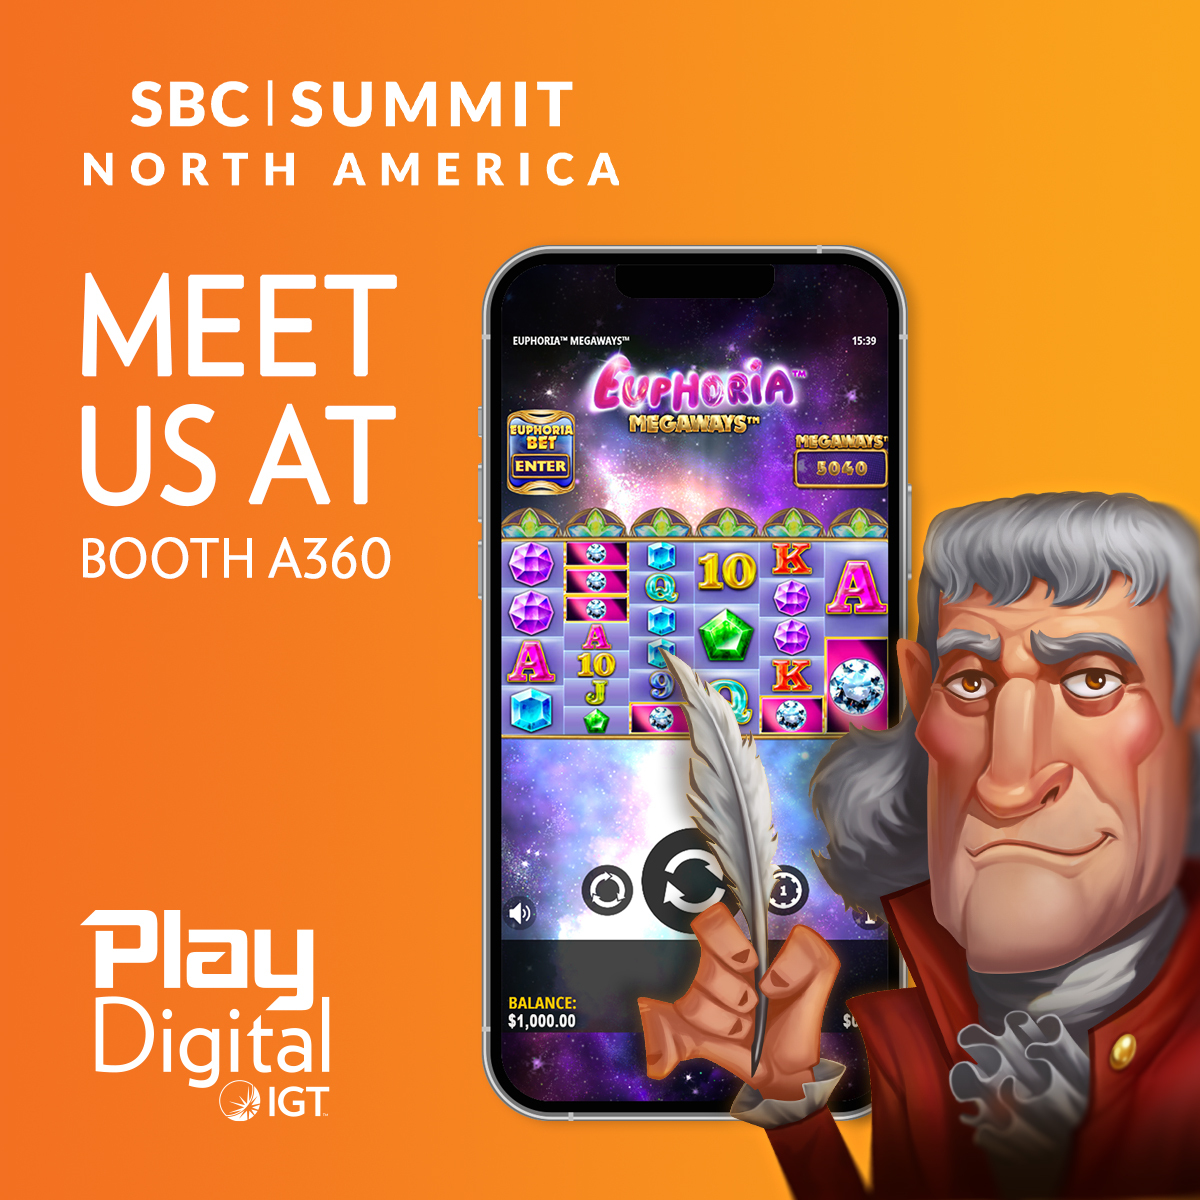 May is almost here, which means SBC North America is just around the corner! Swing by IGT PlayDigital at booth A360 between 9-11 May to learn more about our exciting content.

